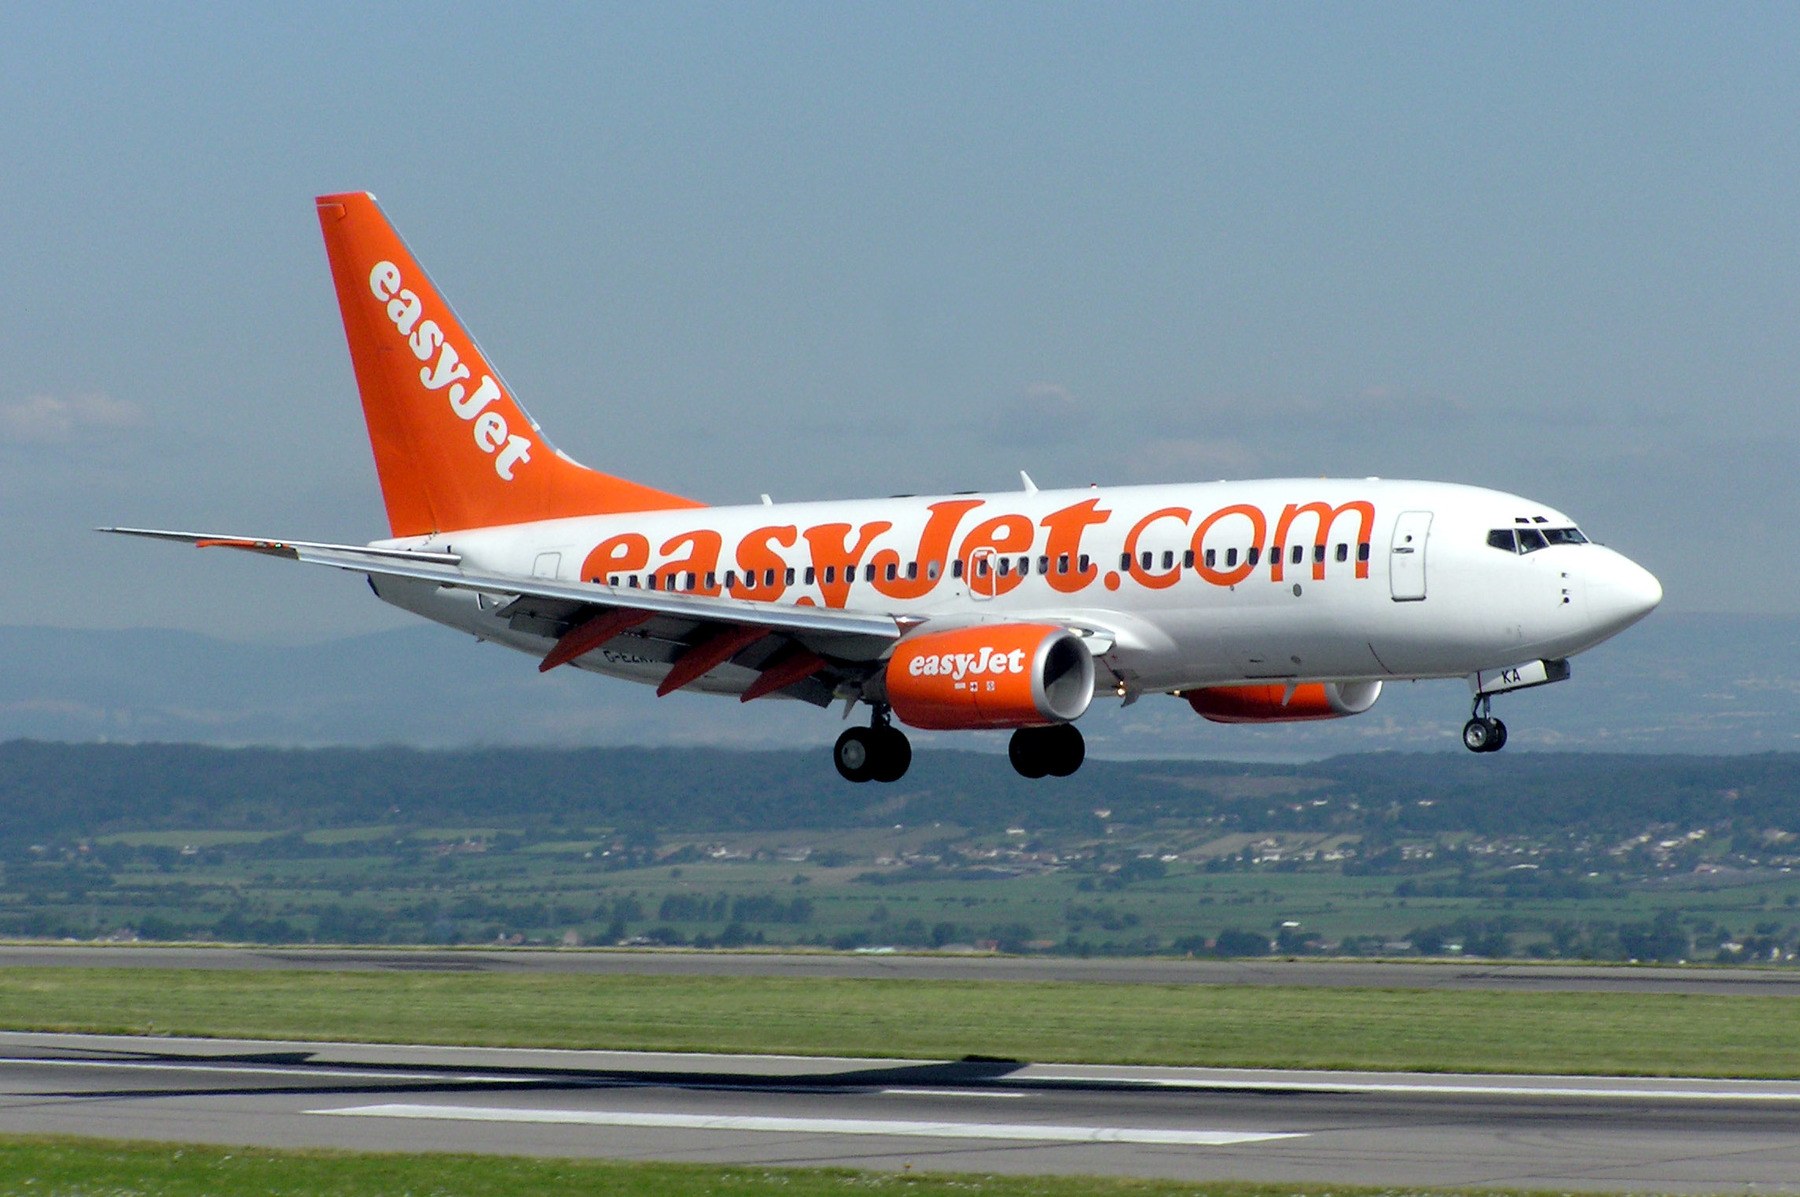 EasyJet criticised of misleading Gatwick passengers in their time of need